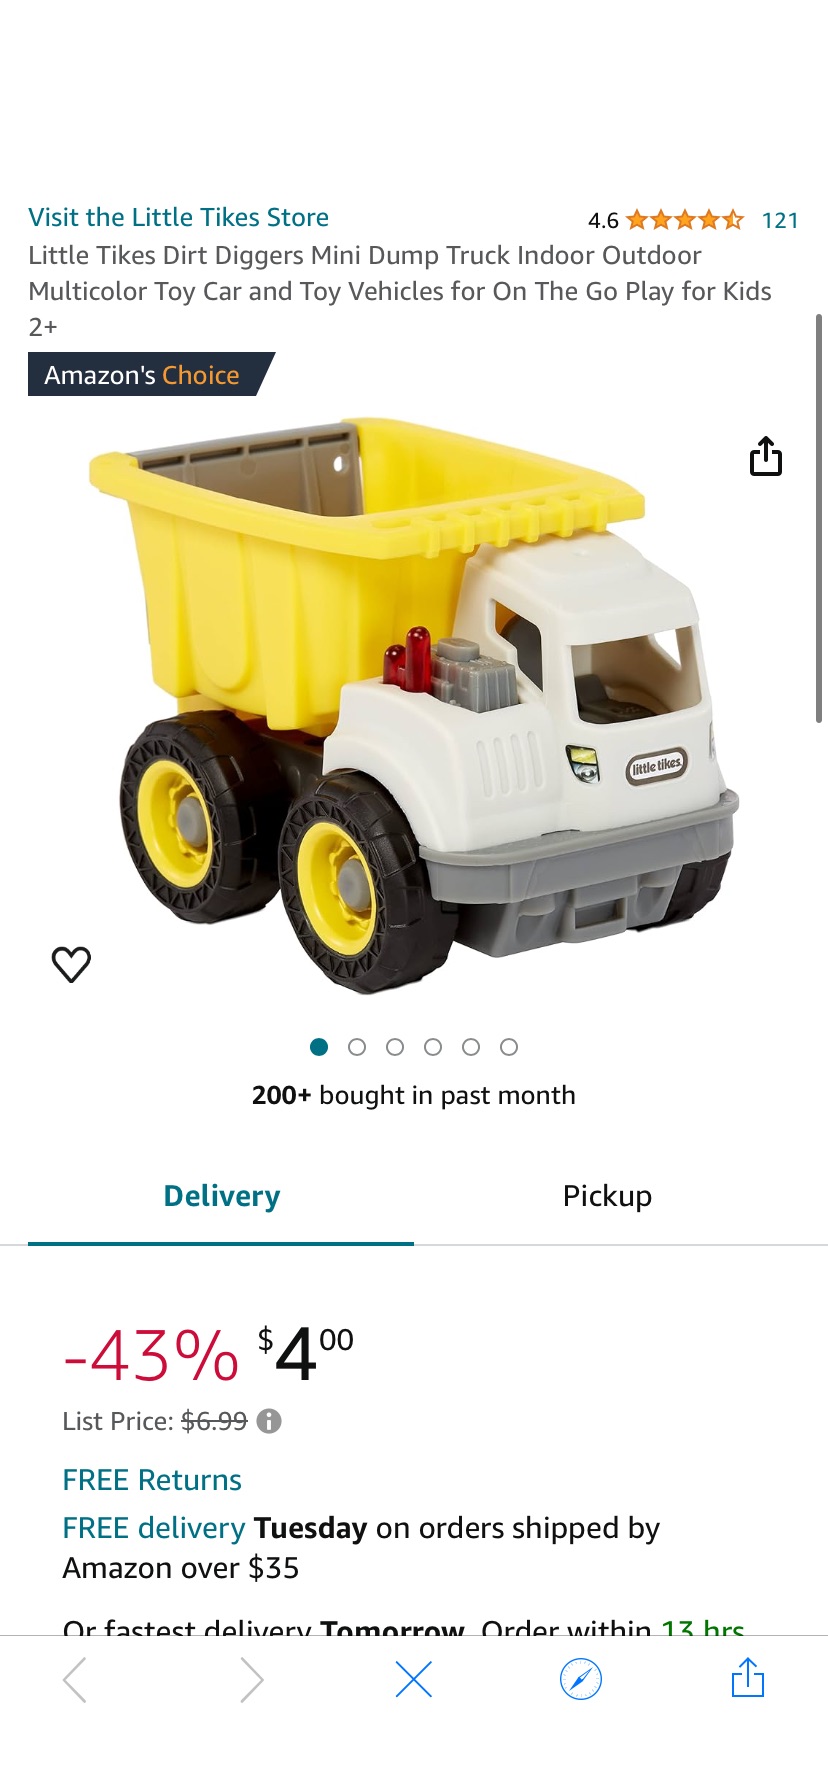 Amazon.com: Little Tikes Dirt Diggers Mini Dump Truck Indoor Outdoor Multicolor Toy Car and Toy Vehicles for On The Go Play for Kids 2+ : Toys & Games